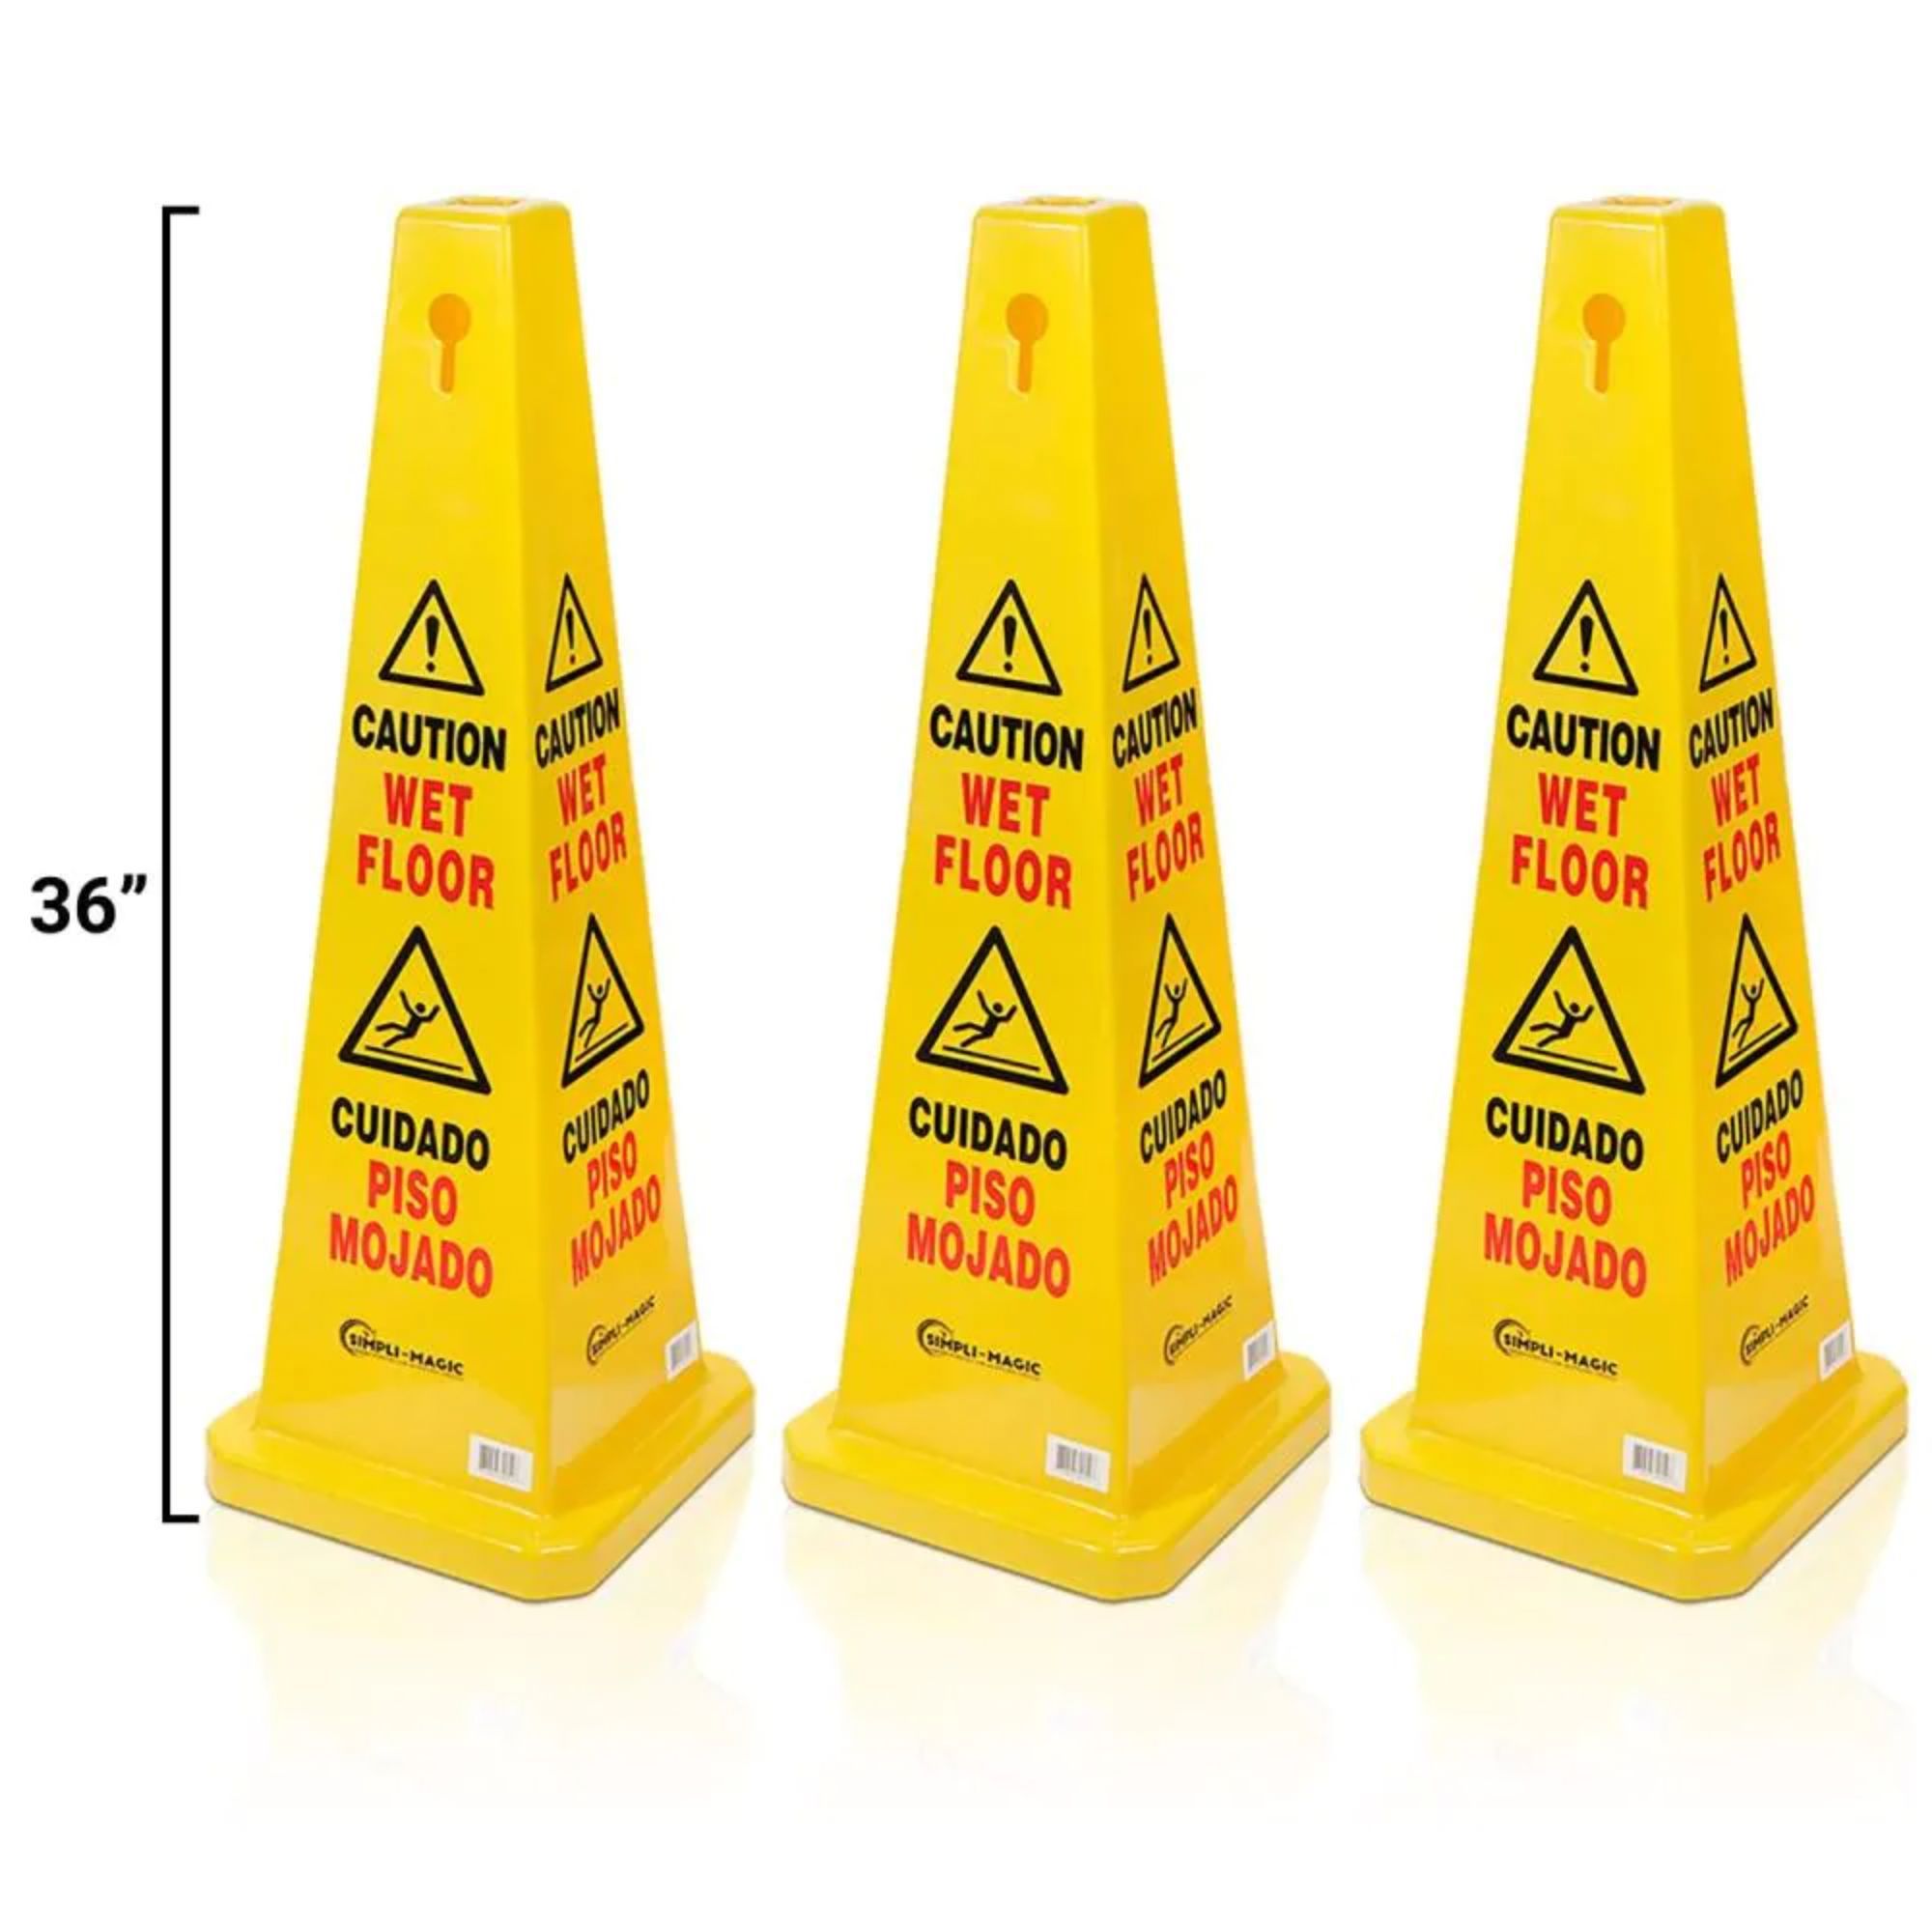 4-Sided Bilingual Signs Cuadado Piso Mojado| Avoid Fall & Slip Accident Repaironics 3 Packs 26” Caution Wet Floor Cones with 13 feet Yellow Plastic Barrier Chainfor Indoors and Outdoors Yellow Caution Wet Floor Sign 